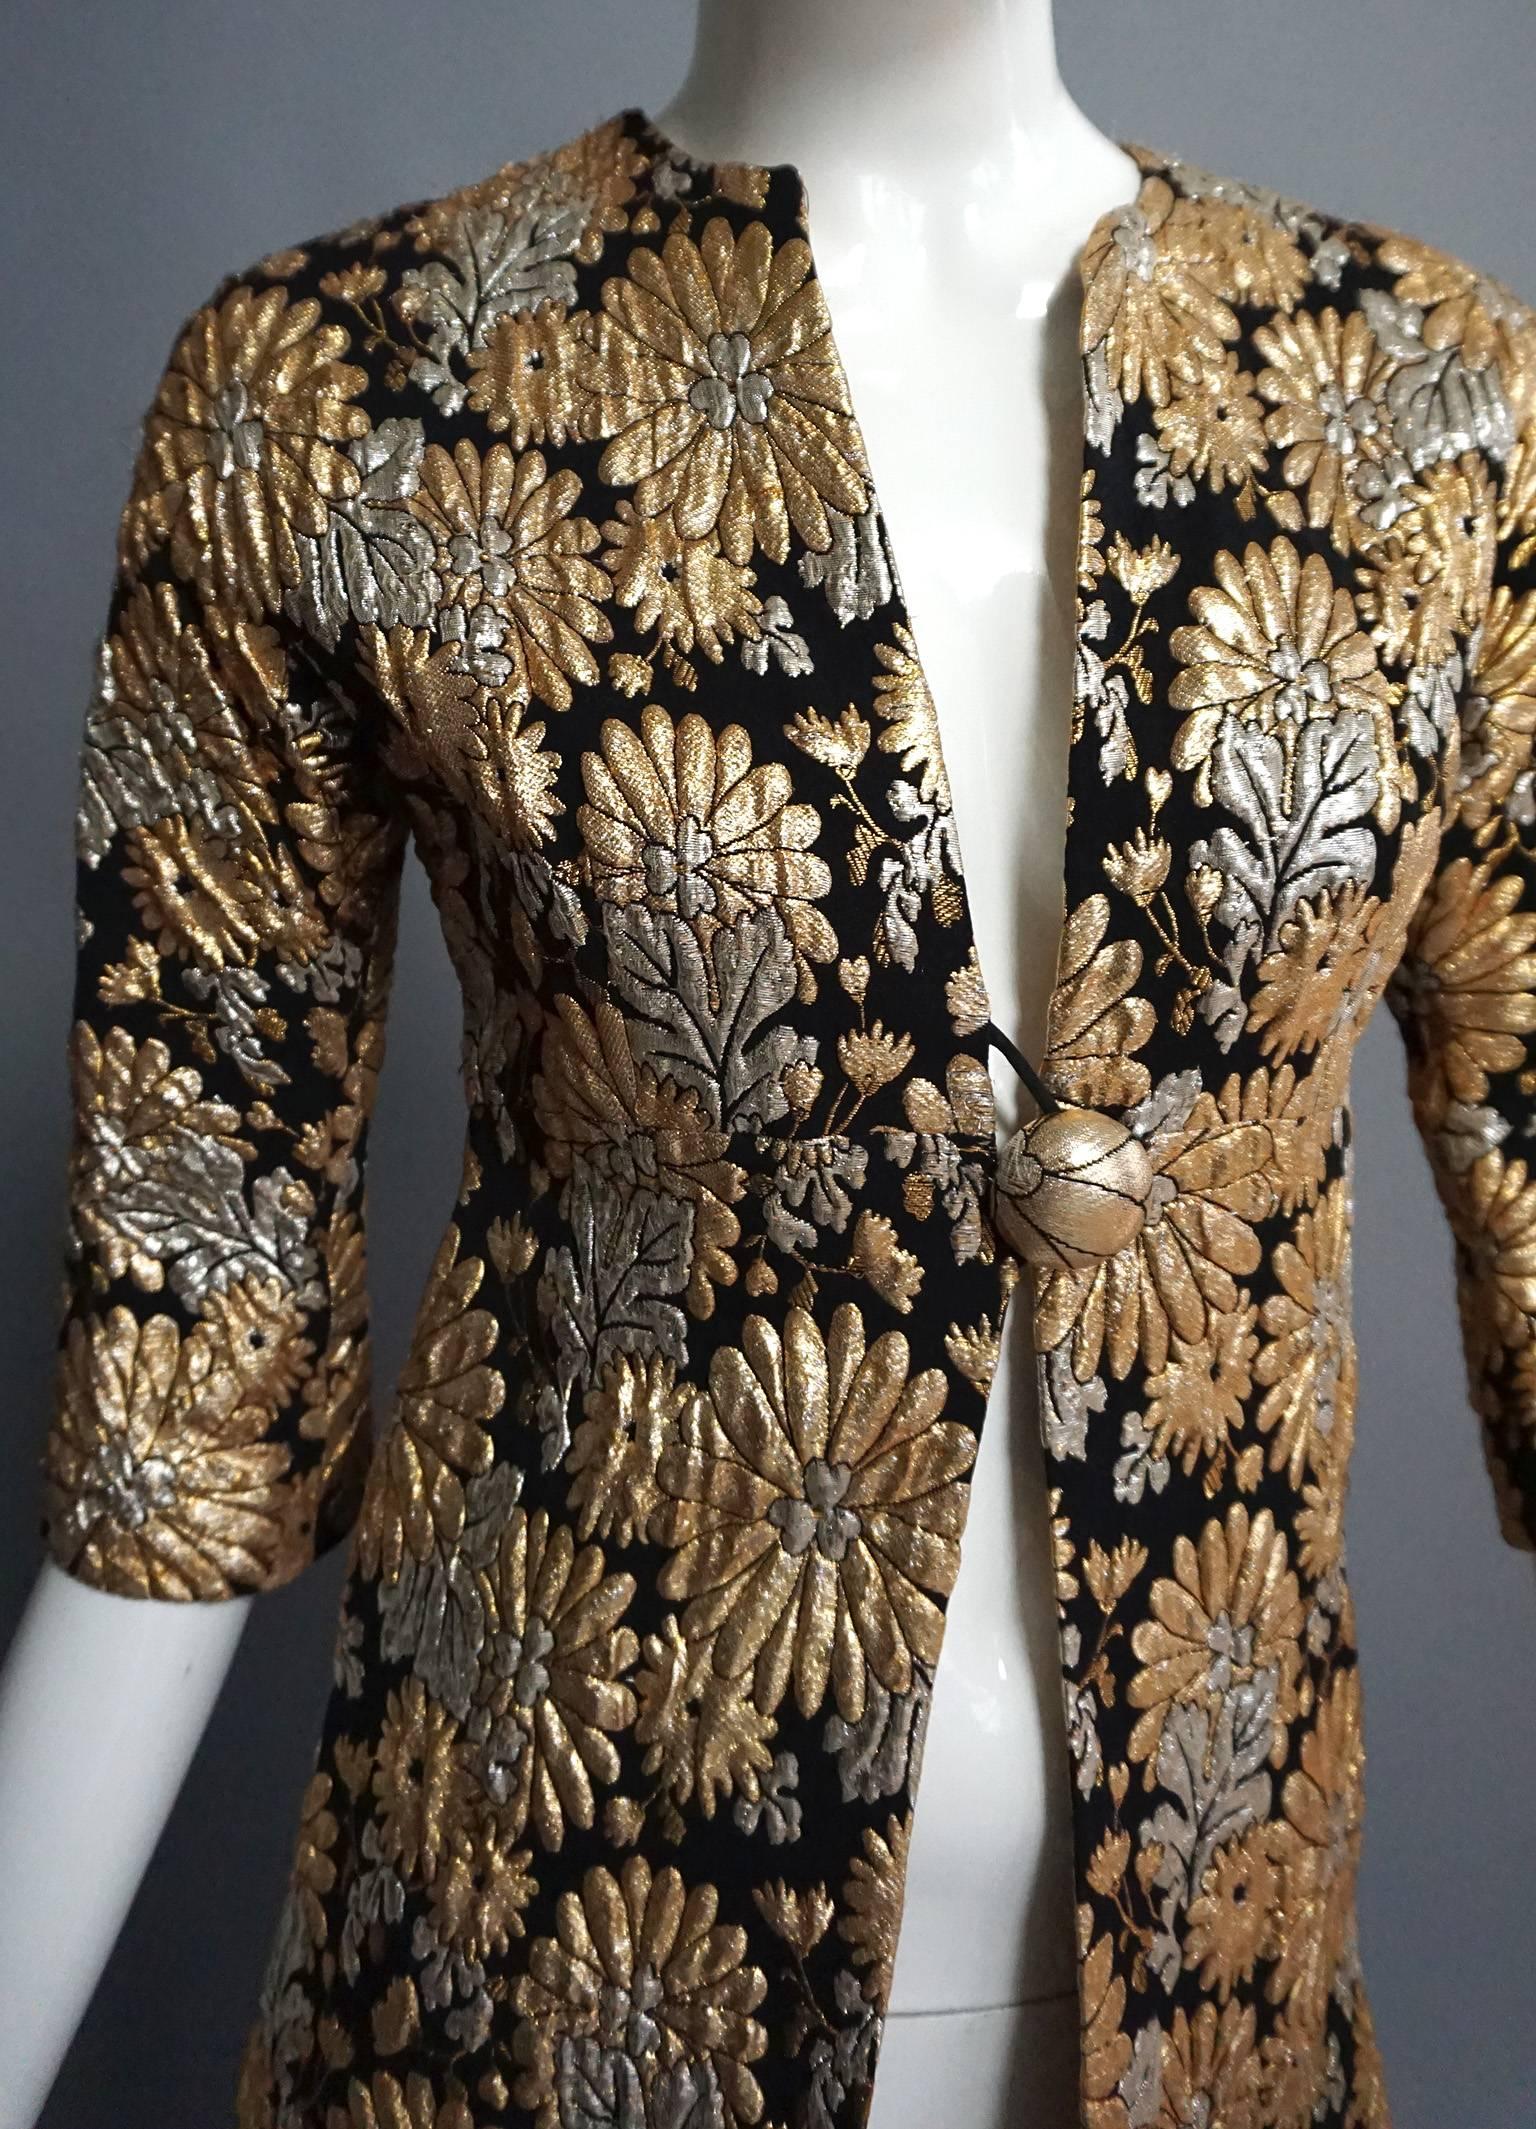 Brown SUZY PERETTE Gold & Silver Lame Floral Print Coat with